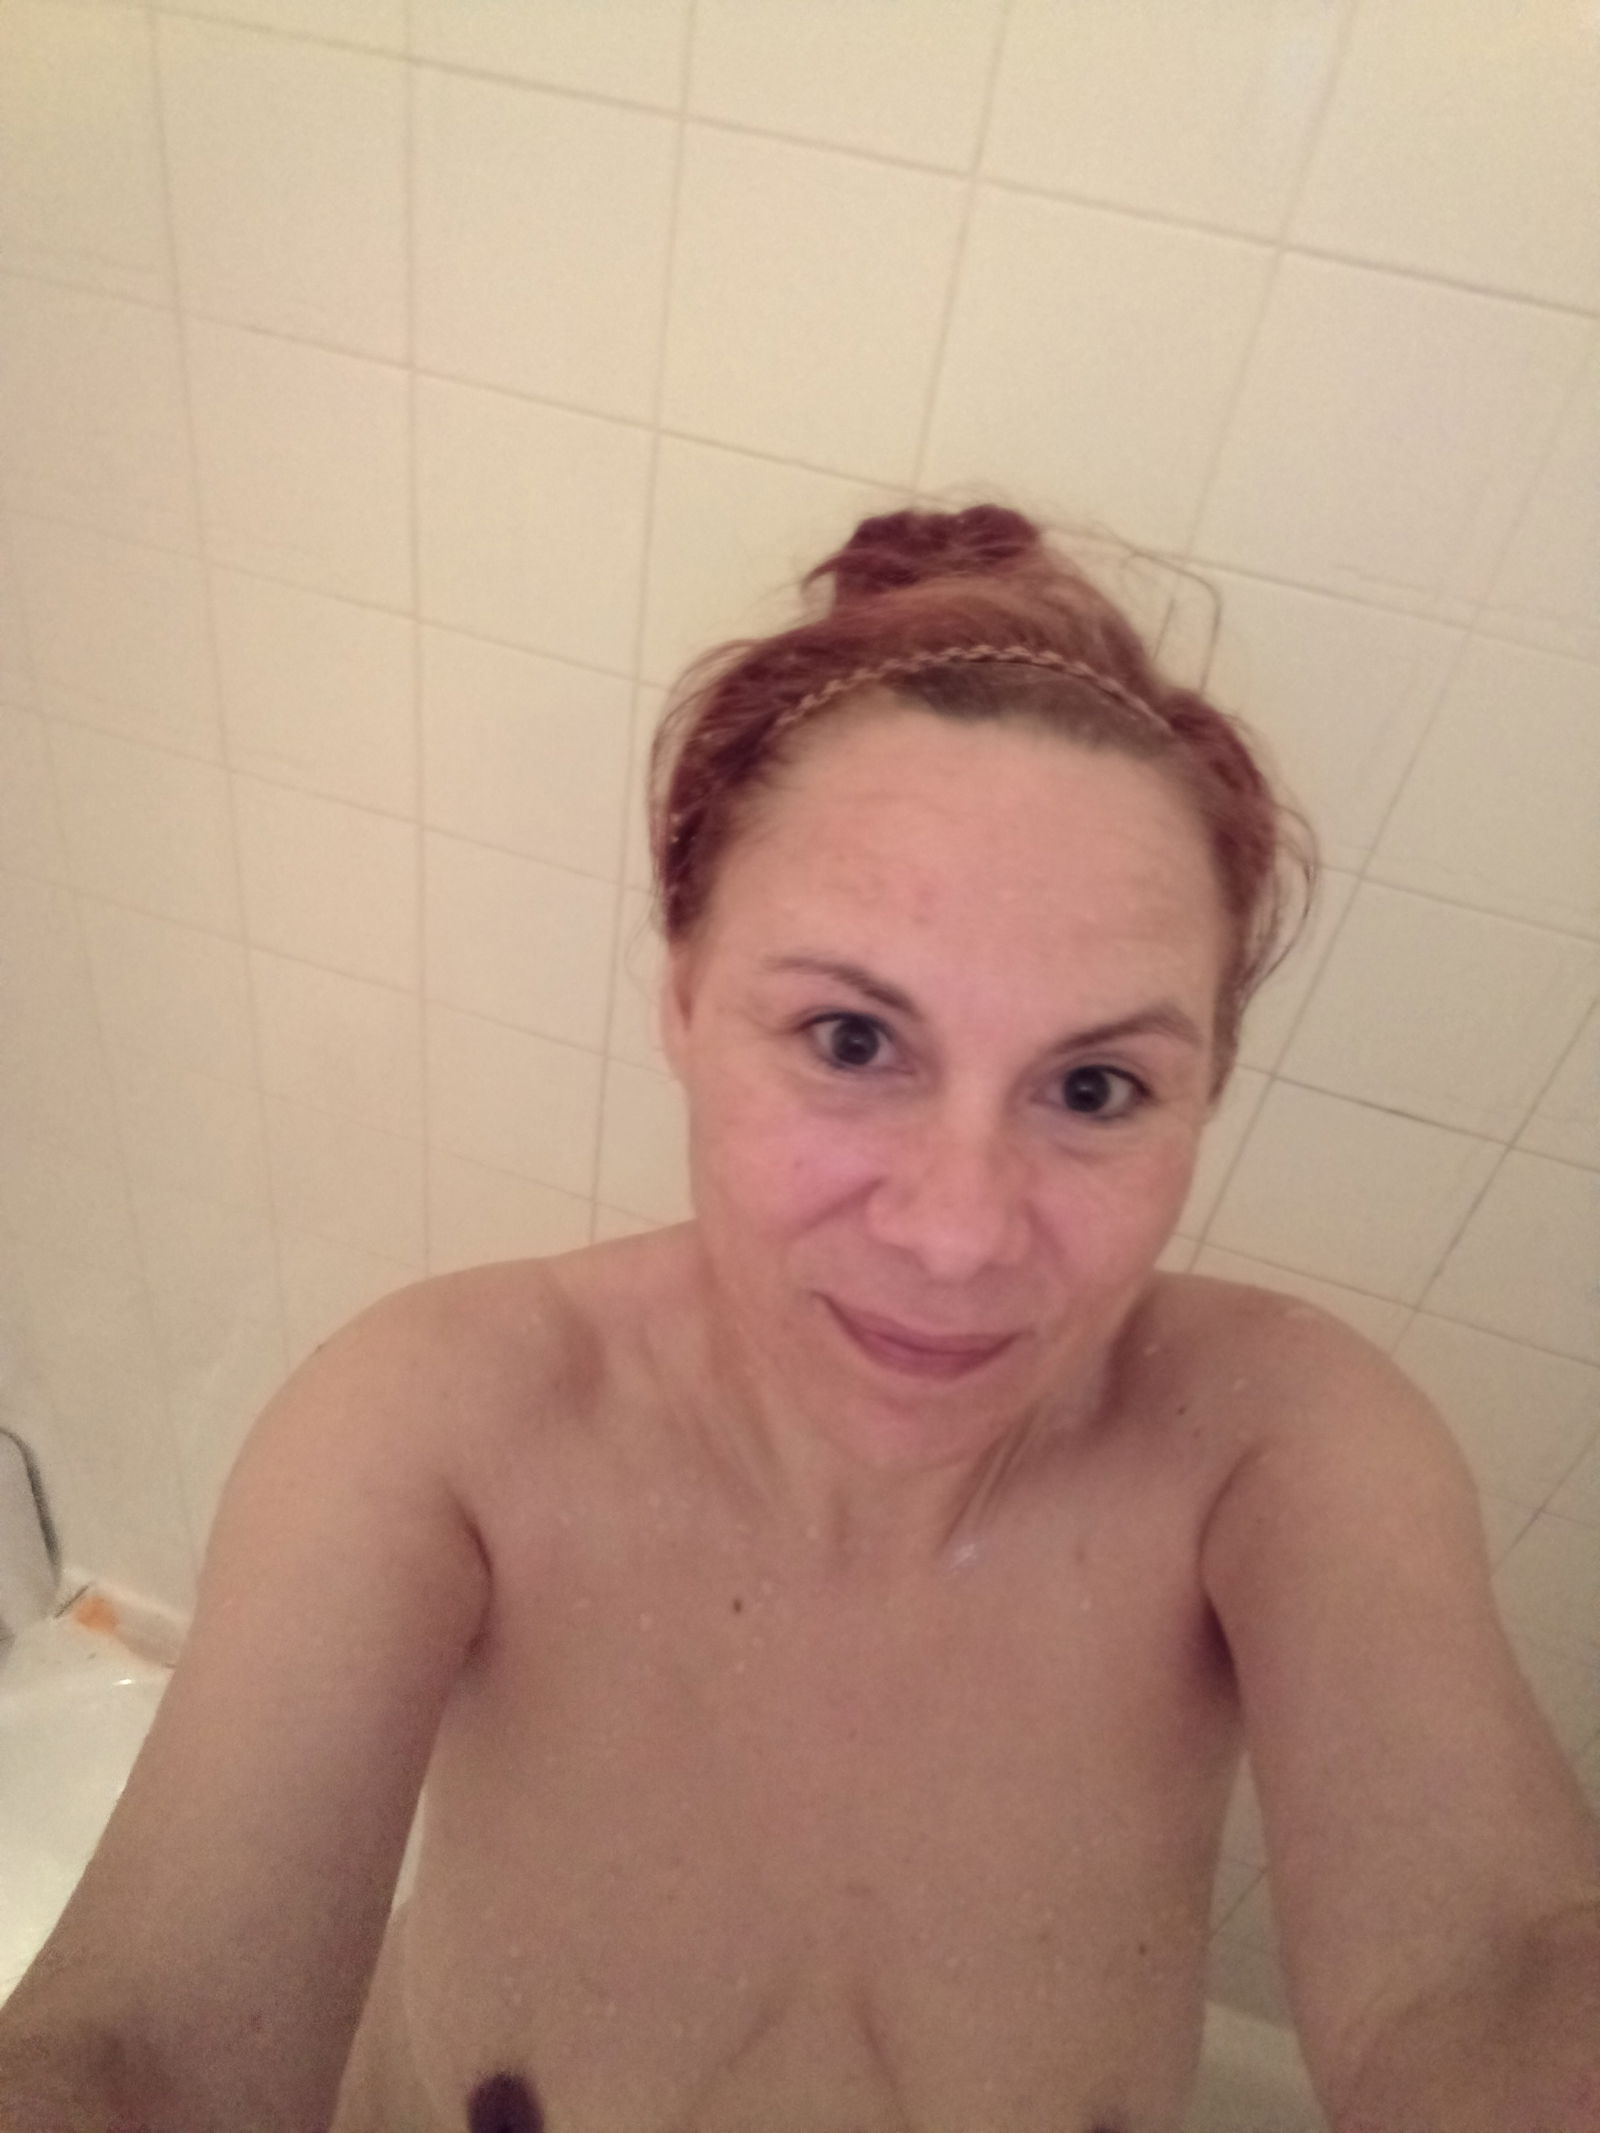 Watch the Photo by Kricketqueenmissy with the username @QueenMissy8277, who is a star user, posted on September 16, 2020 and the text says 'In the Shower'